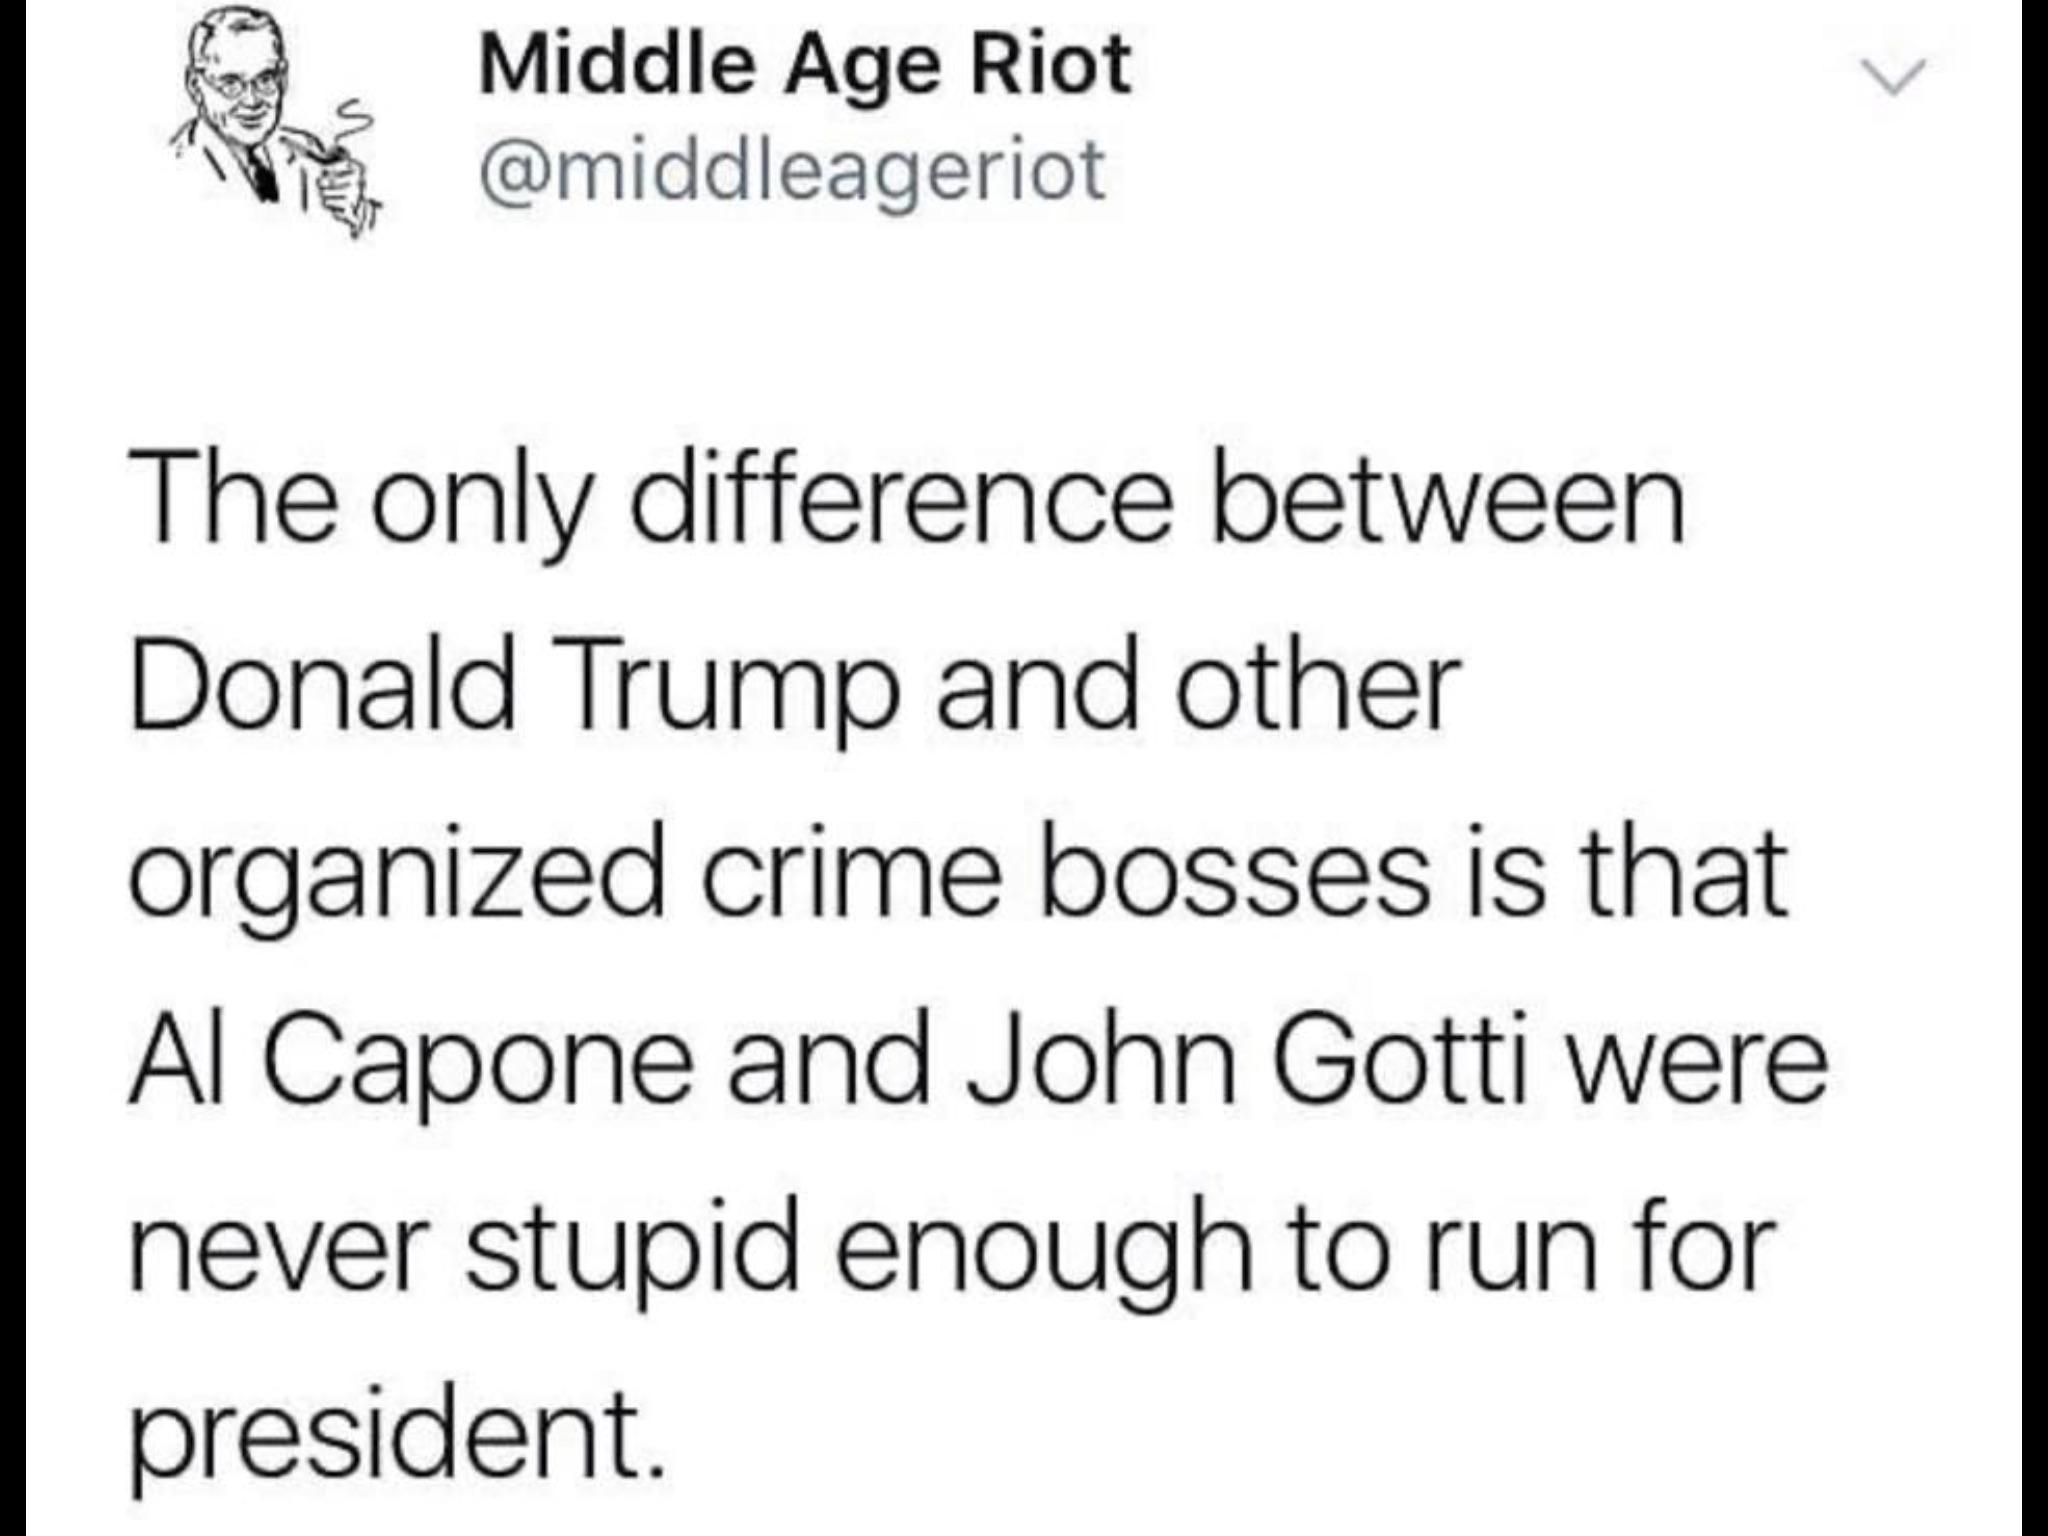 political political-memes political text: Middle Age Riot @middleageriot The only difference between Donald Trump and other organized crime bosses is that Al Capone and John Gotti were never stupid enough to run for president. 